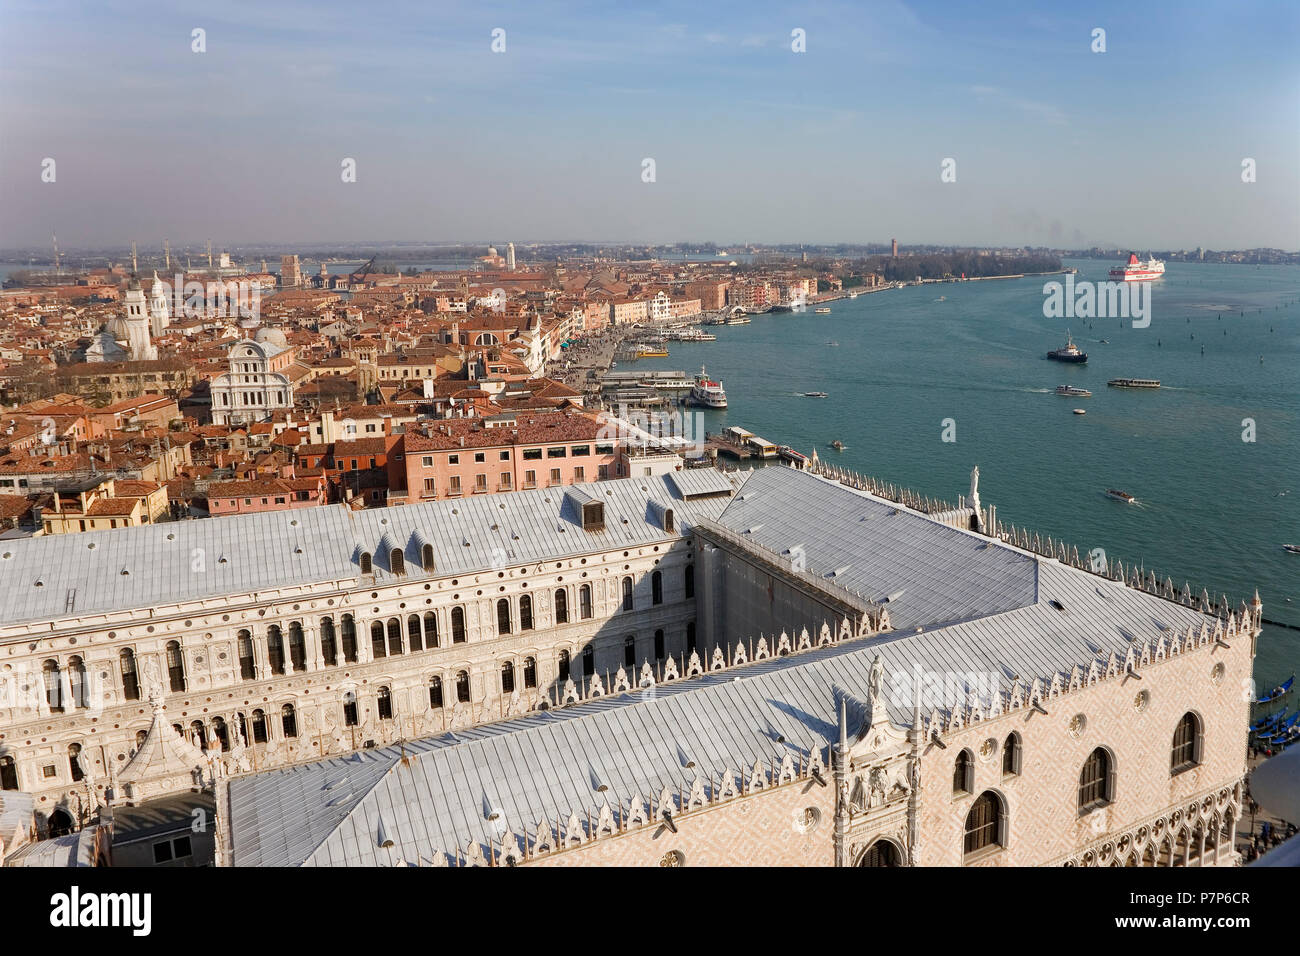 The Palazzo Ducale; Castello and Bacino di San Marco beyond, with a large ship leaving port: seen from the the Campanile di San Marco, Venice, Italy Stock Photo